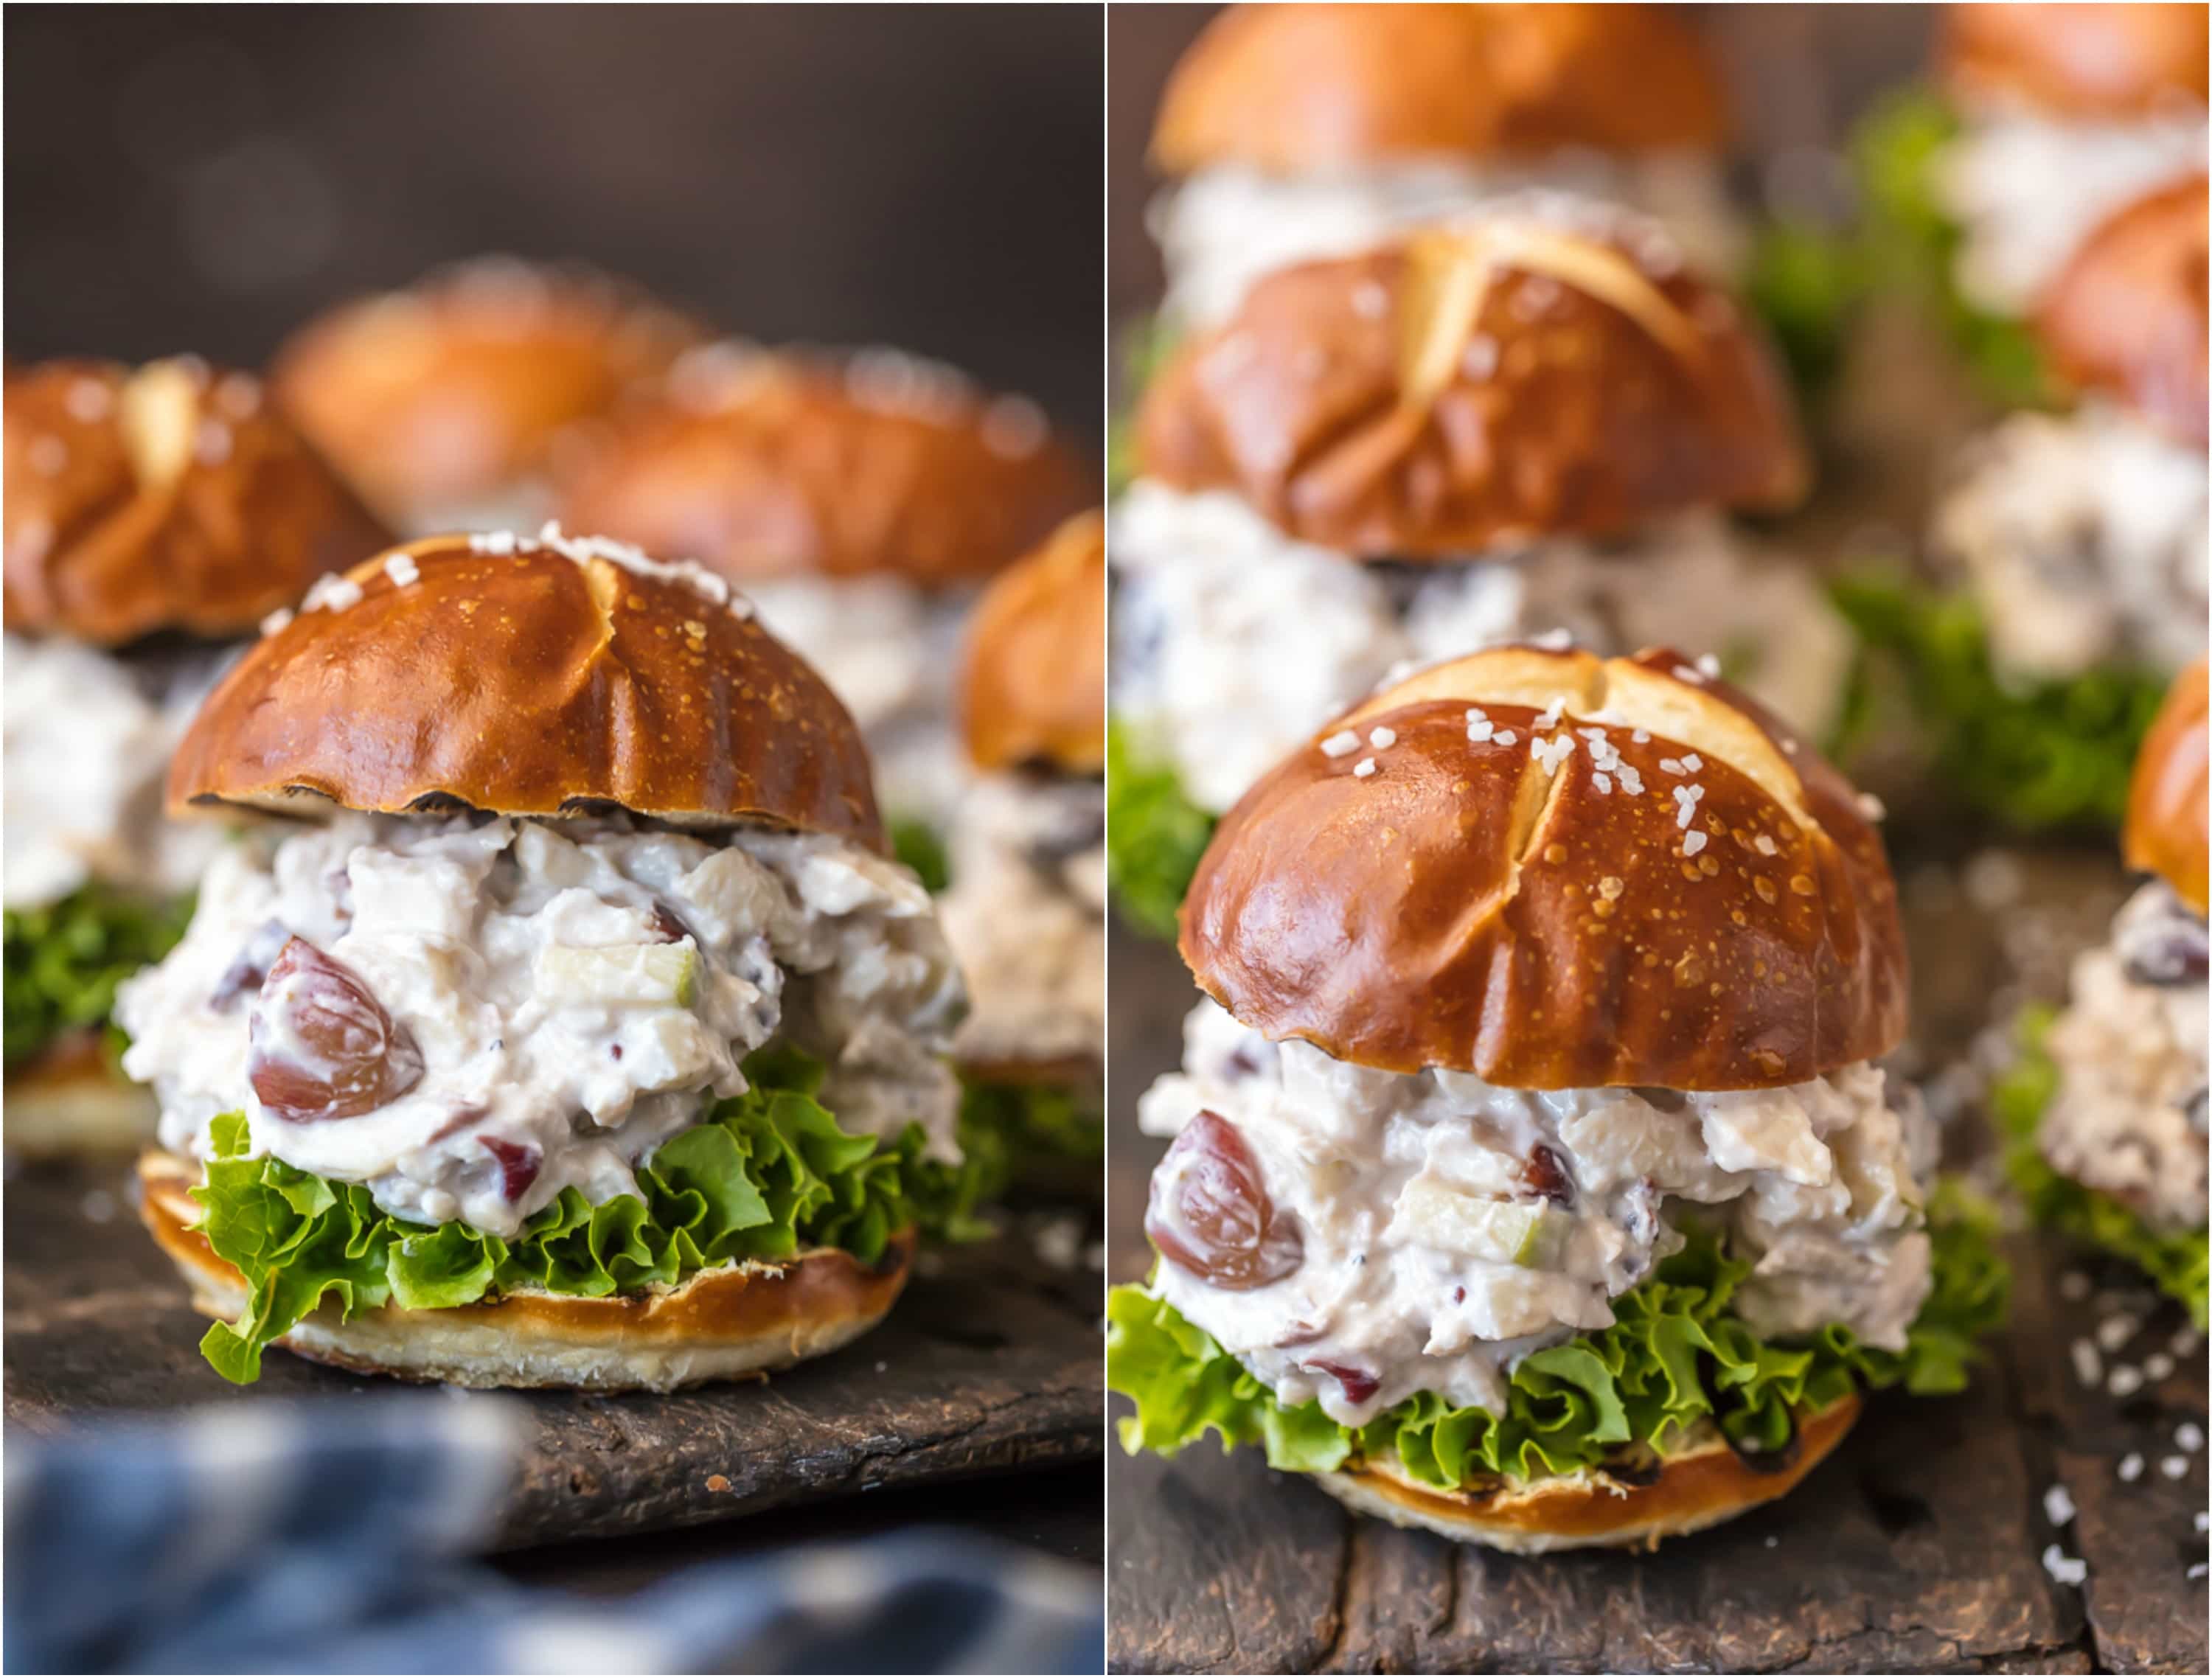 HEALTHY CHICKEN SALAD SLIDERS are just what Summer ordered. So fun for showers, parties, or any get together. You can eat more than one because the base is greek yogurt...guilt free and delicious!